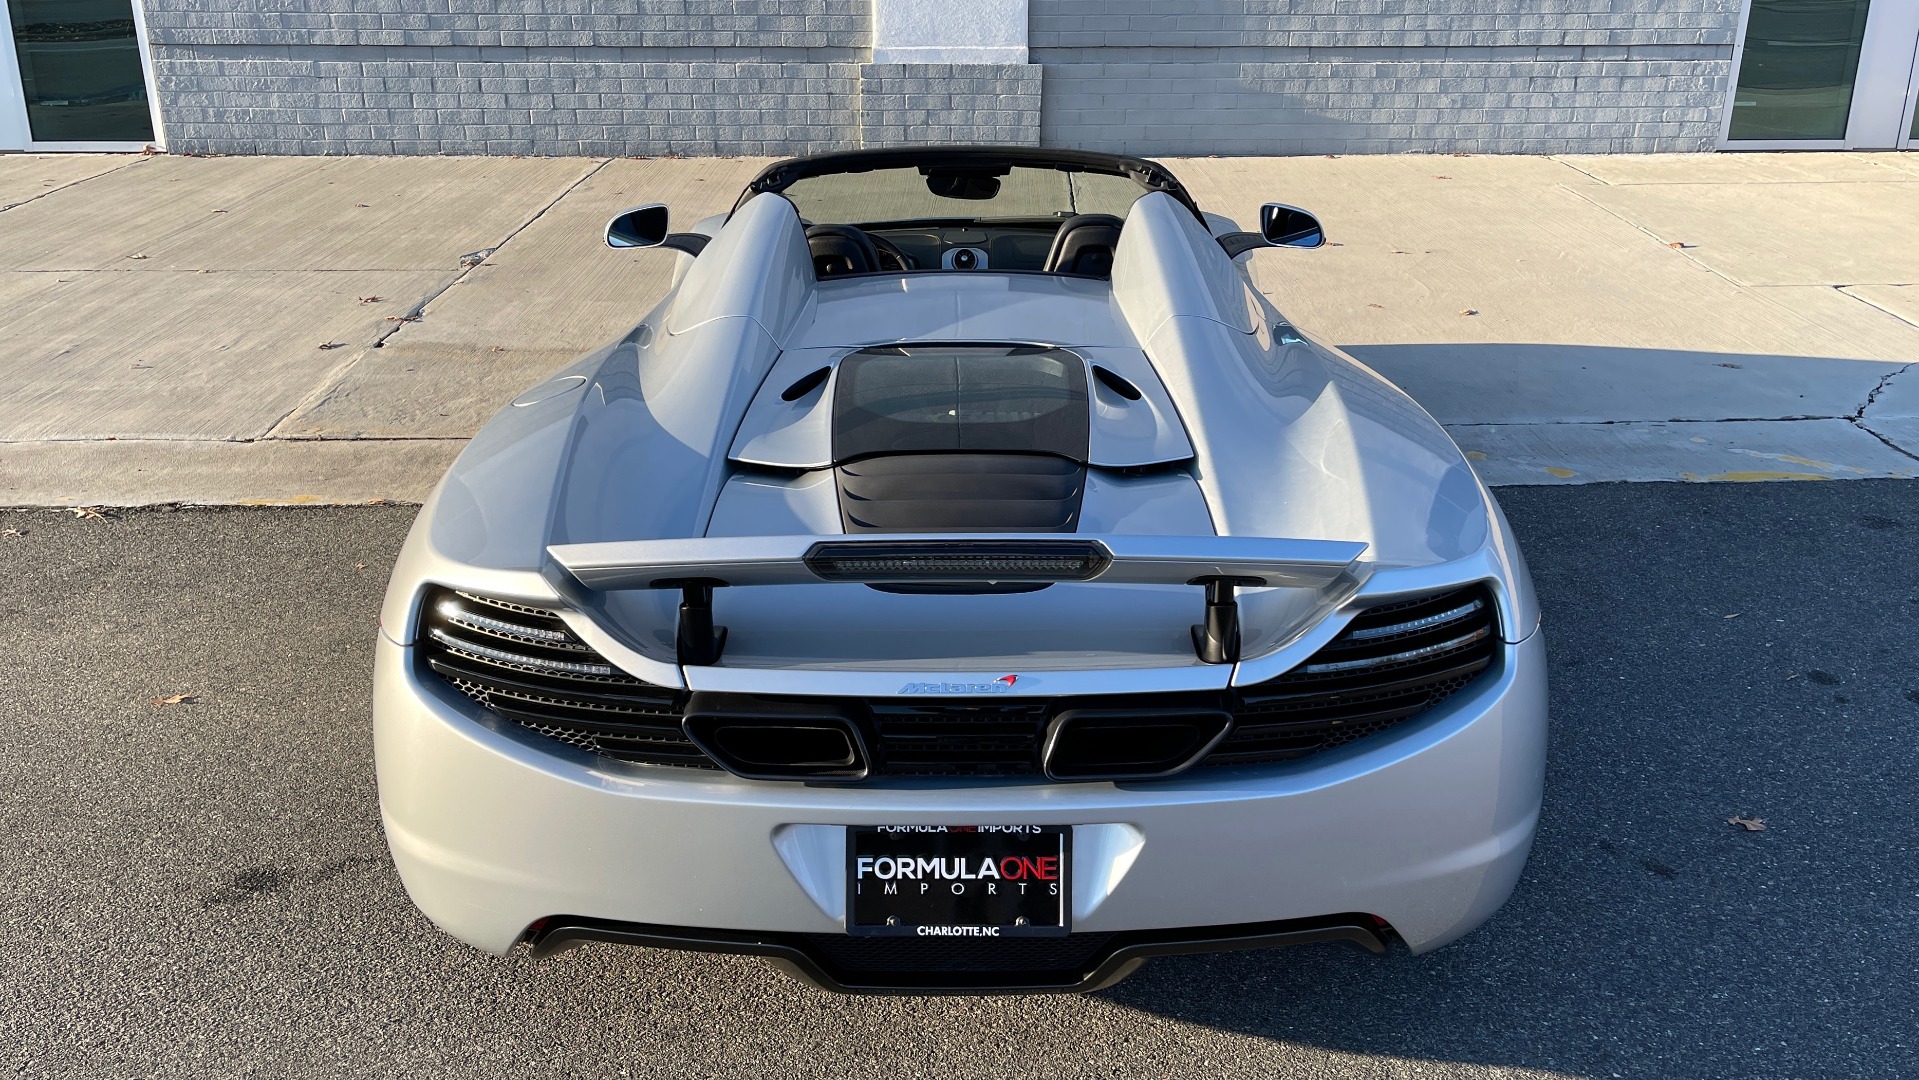 Used 2013 McLaren MP4 12C SPIDER 3.8L TURBO V8 616HP / 7AM TRANS / NAV / MERIDIAN SND for sale $145,000 at Formula Imports in Charlotte NC 28227 30